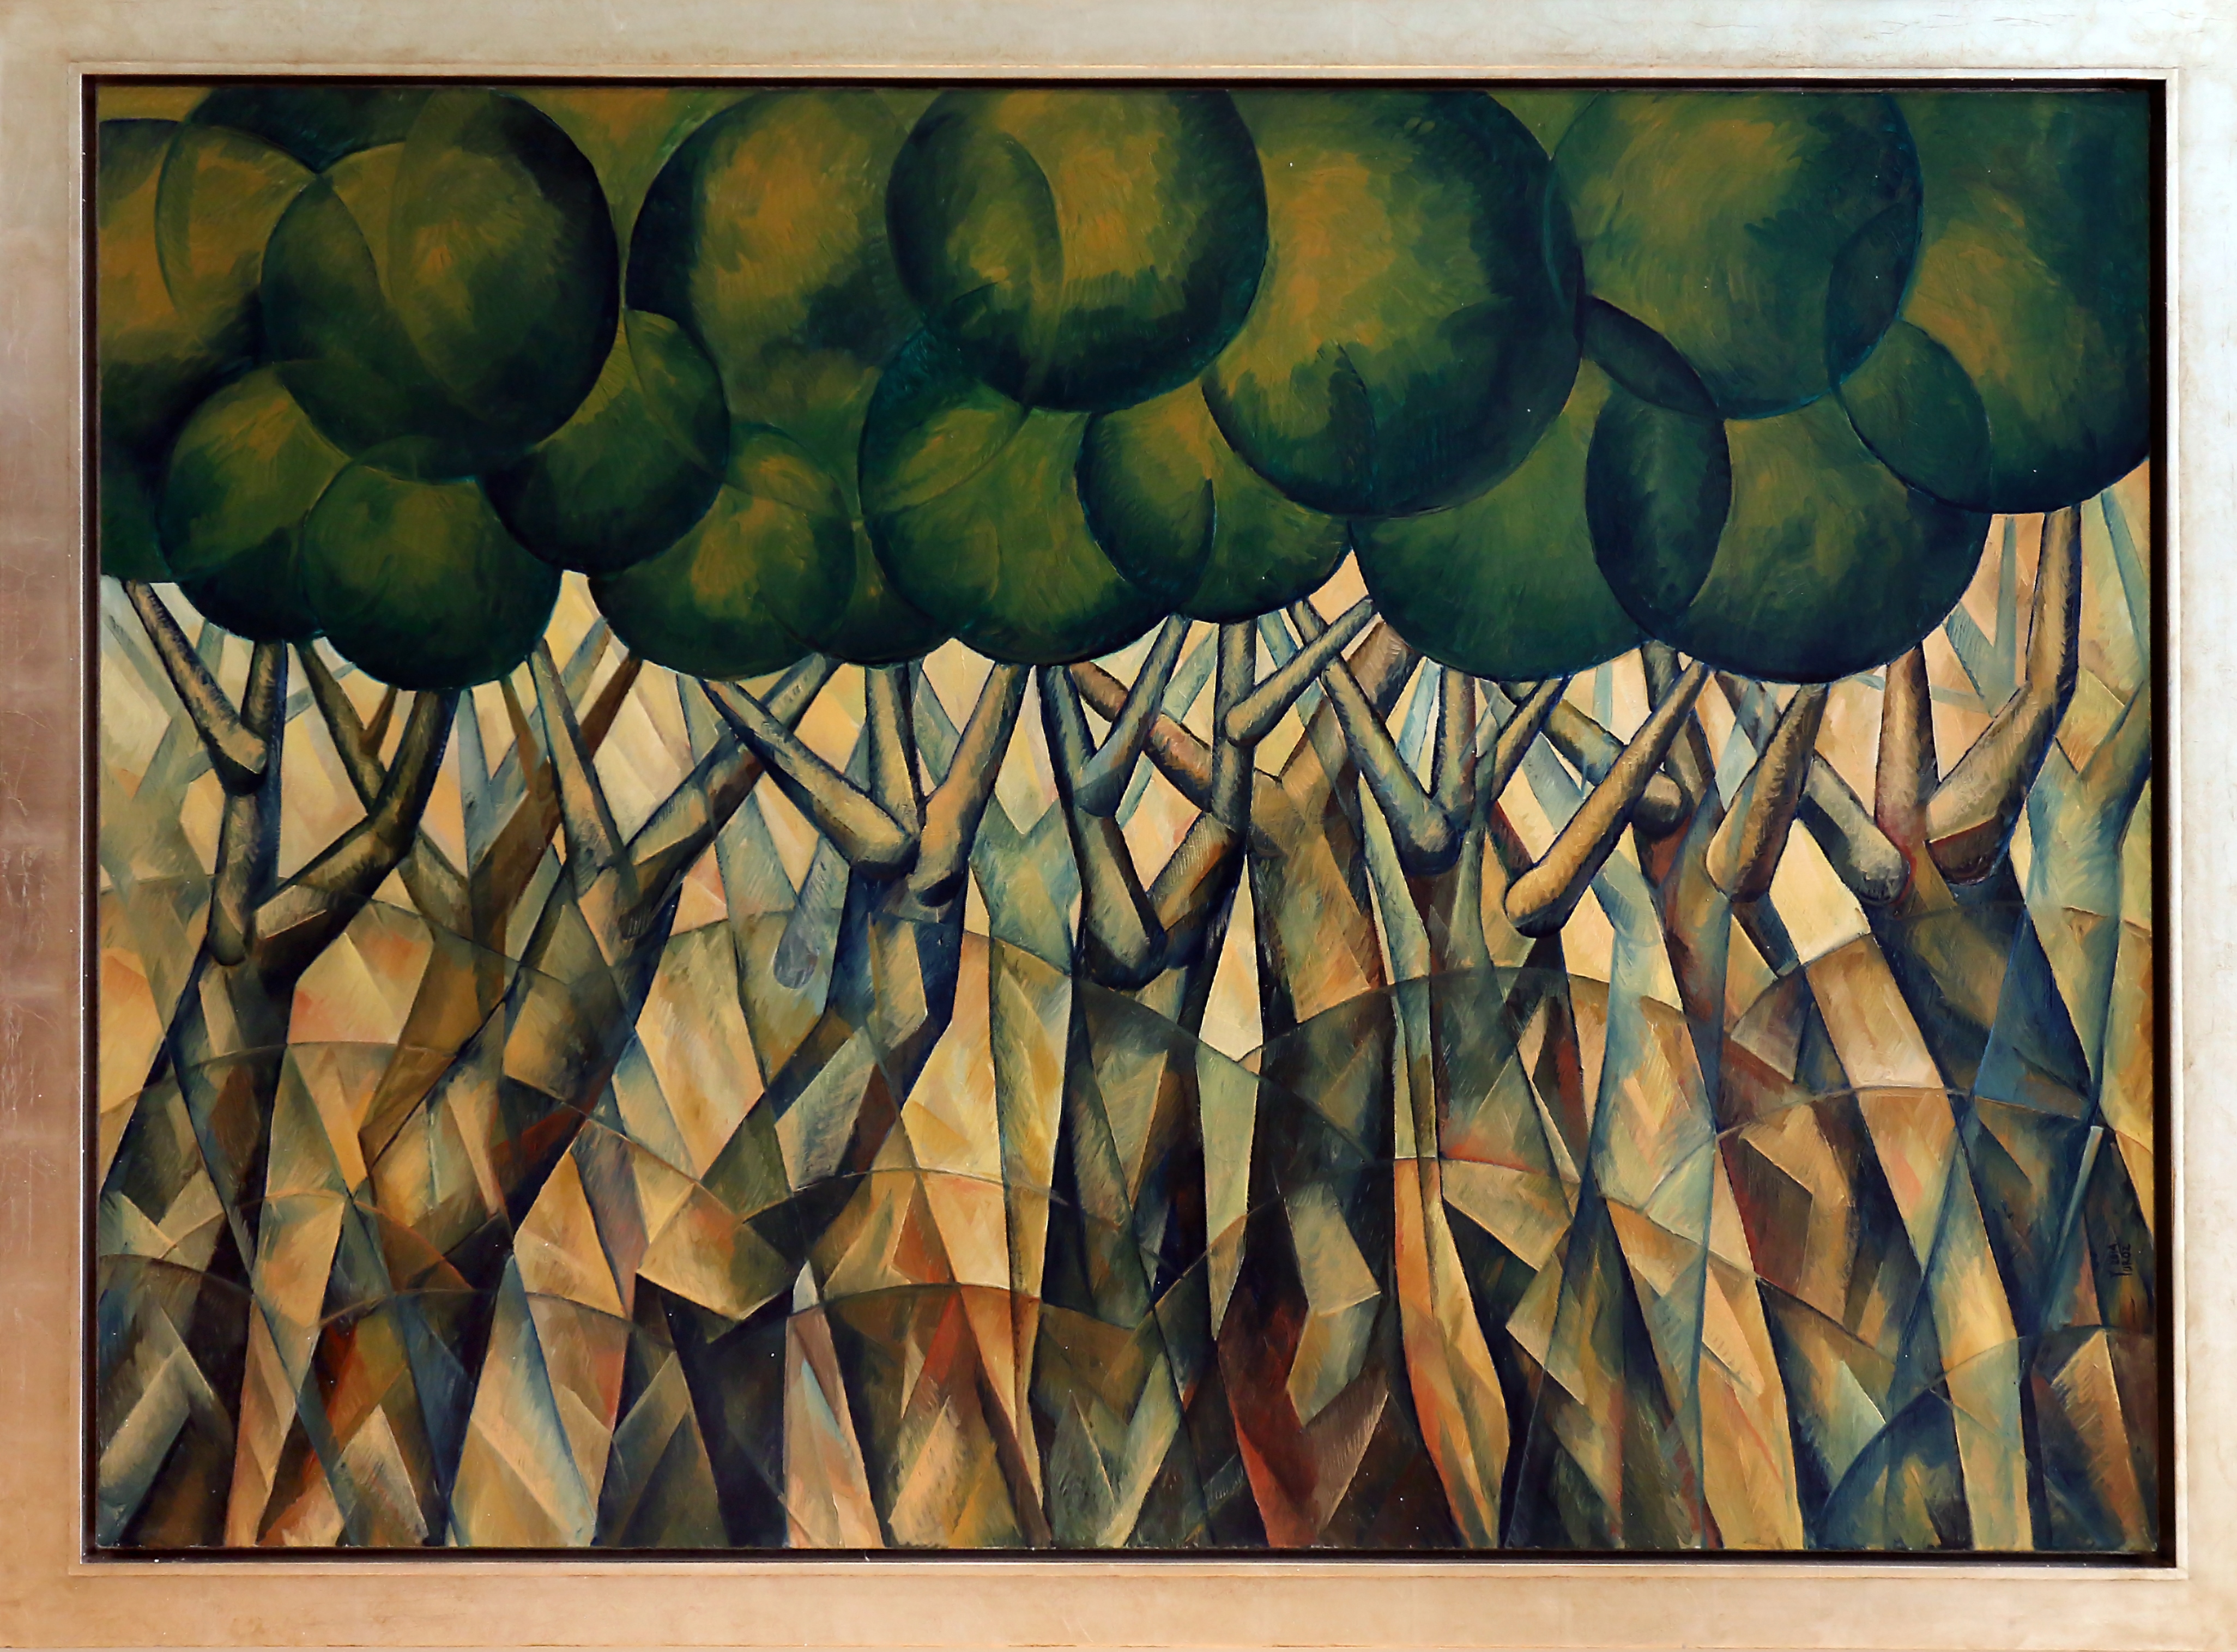 Yuroz’ donated his piece, Dancing Trees to the Coral Springs Museum of Art.